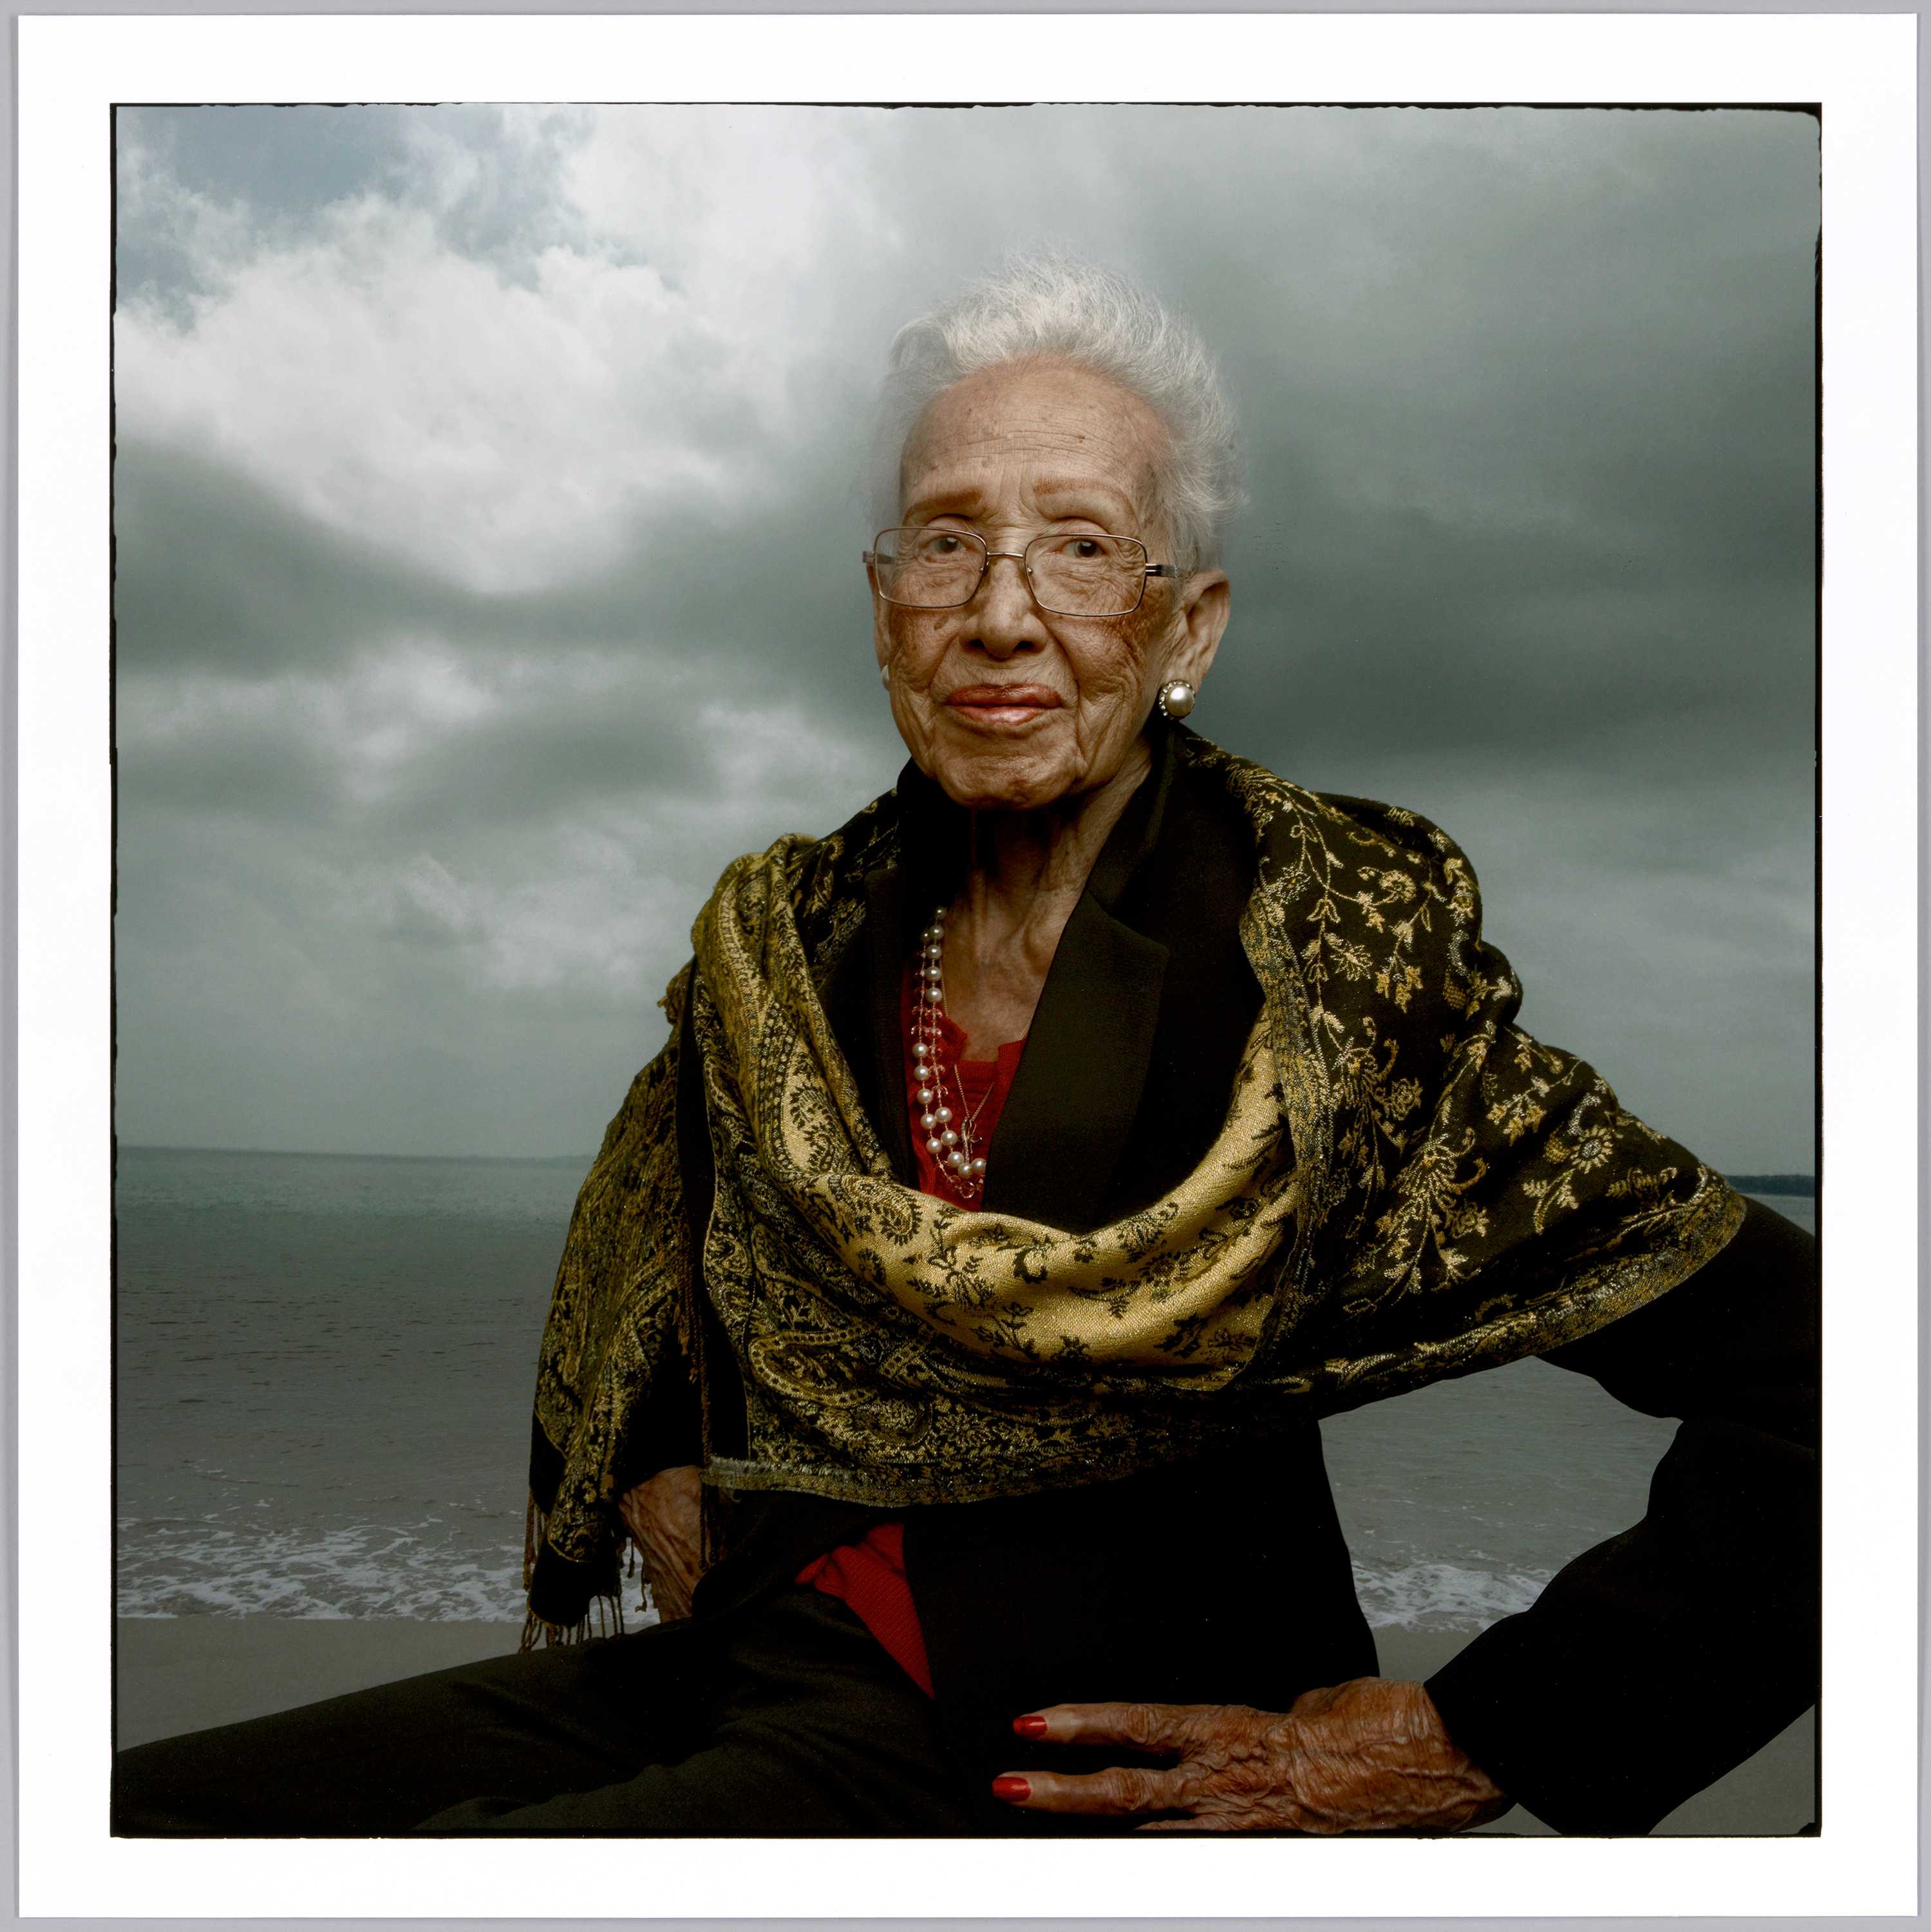 A portrait of Katherine Johnson looking at the camera with a hand on her hip in front of the ocean.